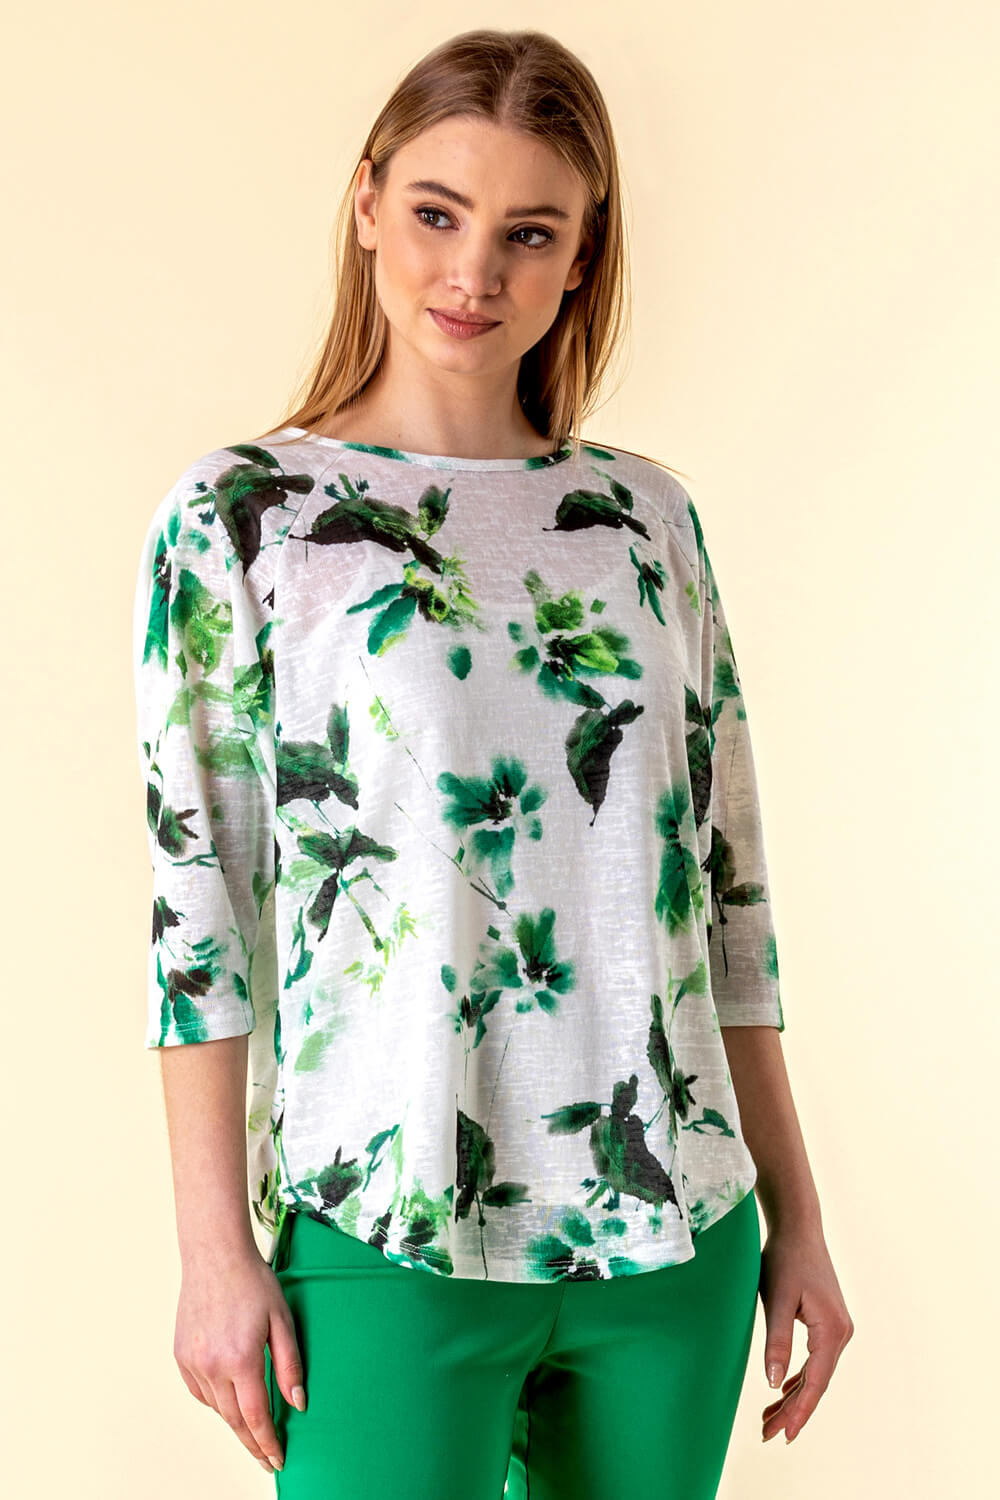 Green Floral Print Jersey Top, Image 4 of 4